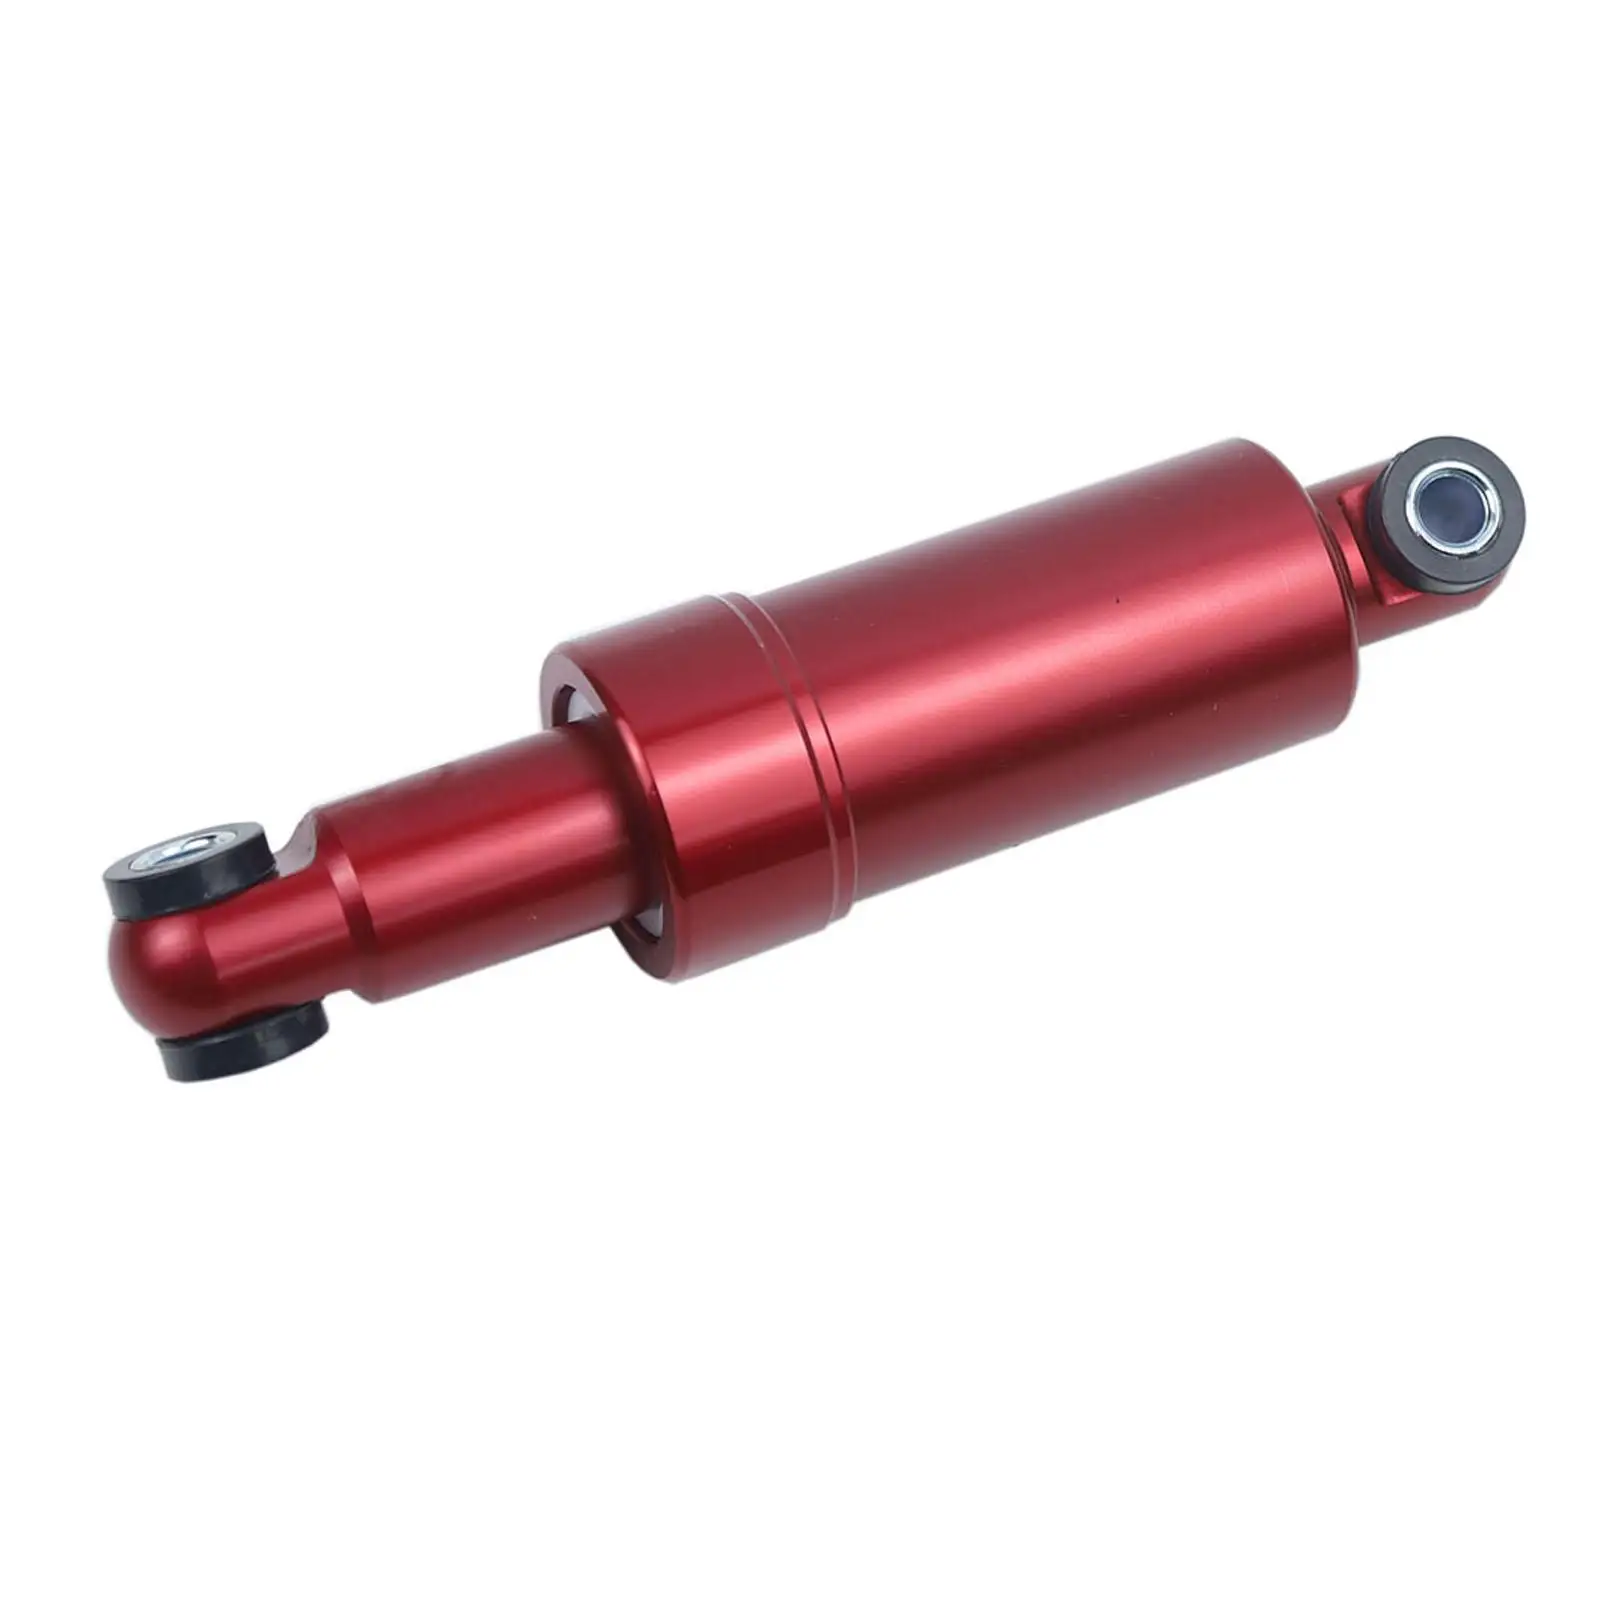 150mm Aluminum Alloy Bike Rear Suspension Shock Absorber Replace for Folding Scooter Mountain Bikes 49cc Pocket Bike Parts